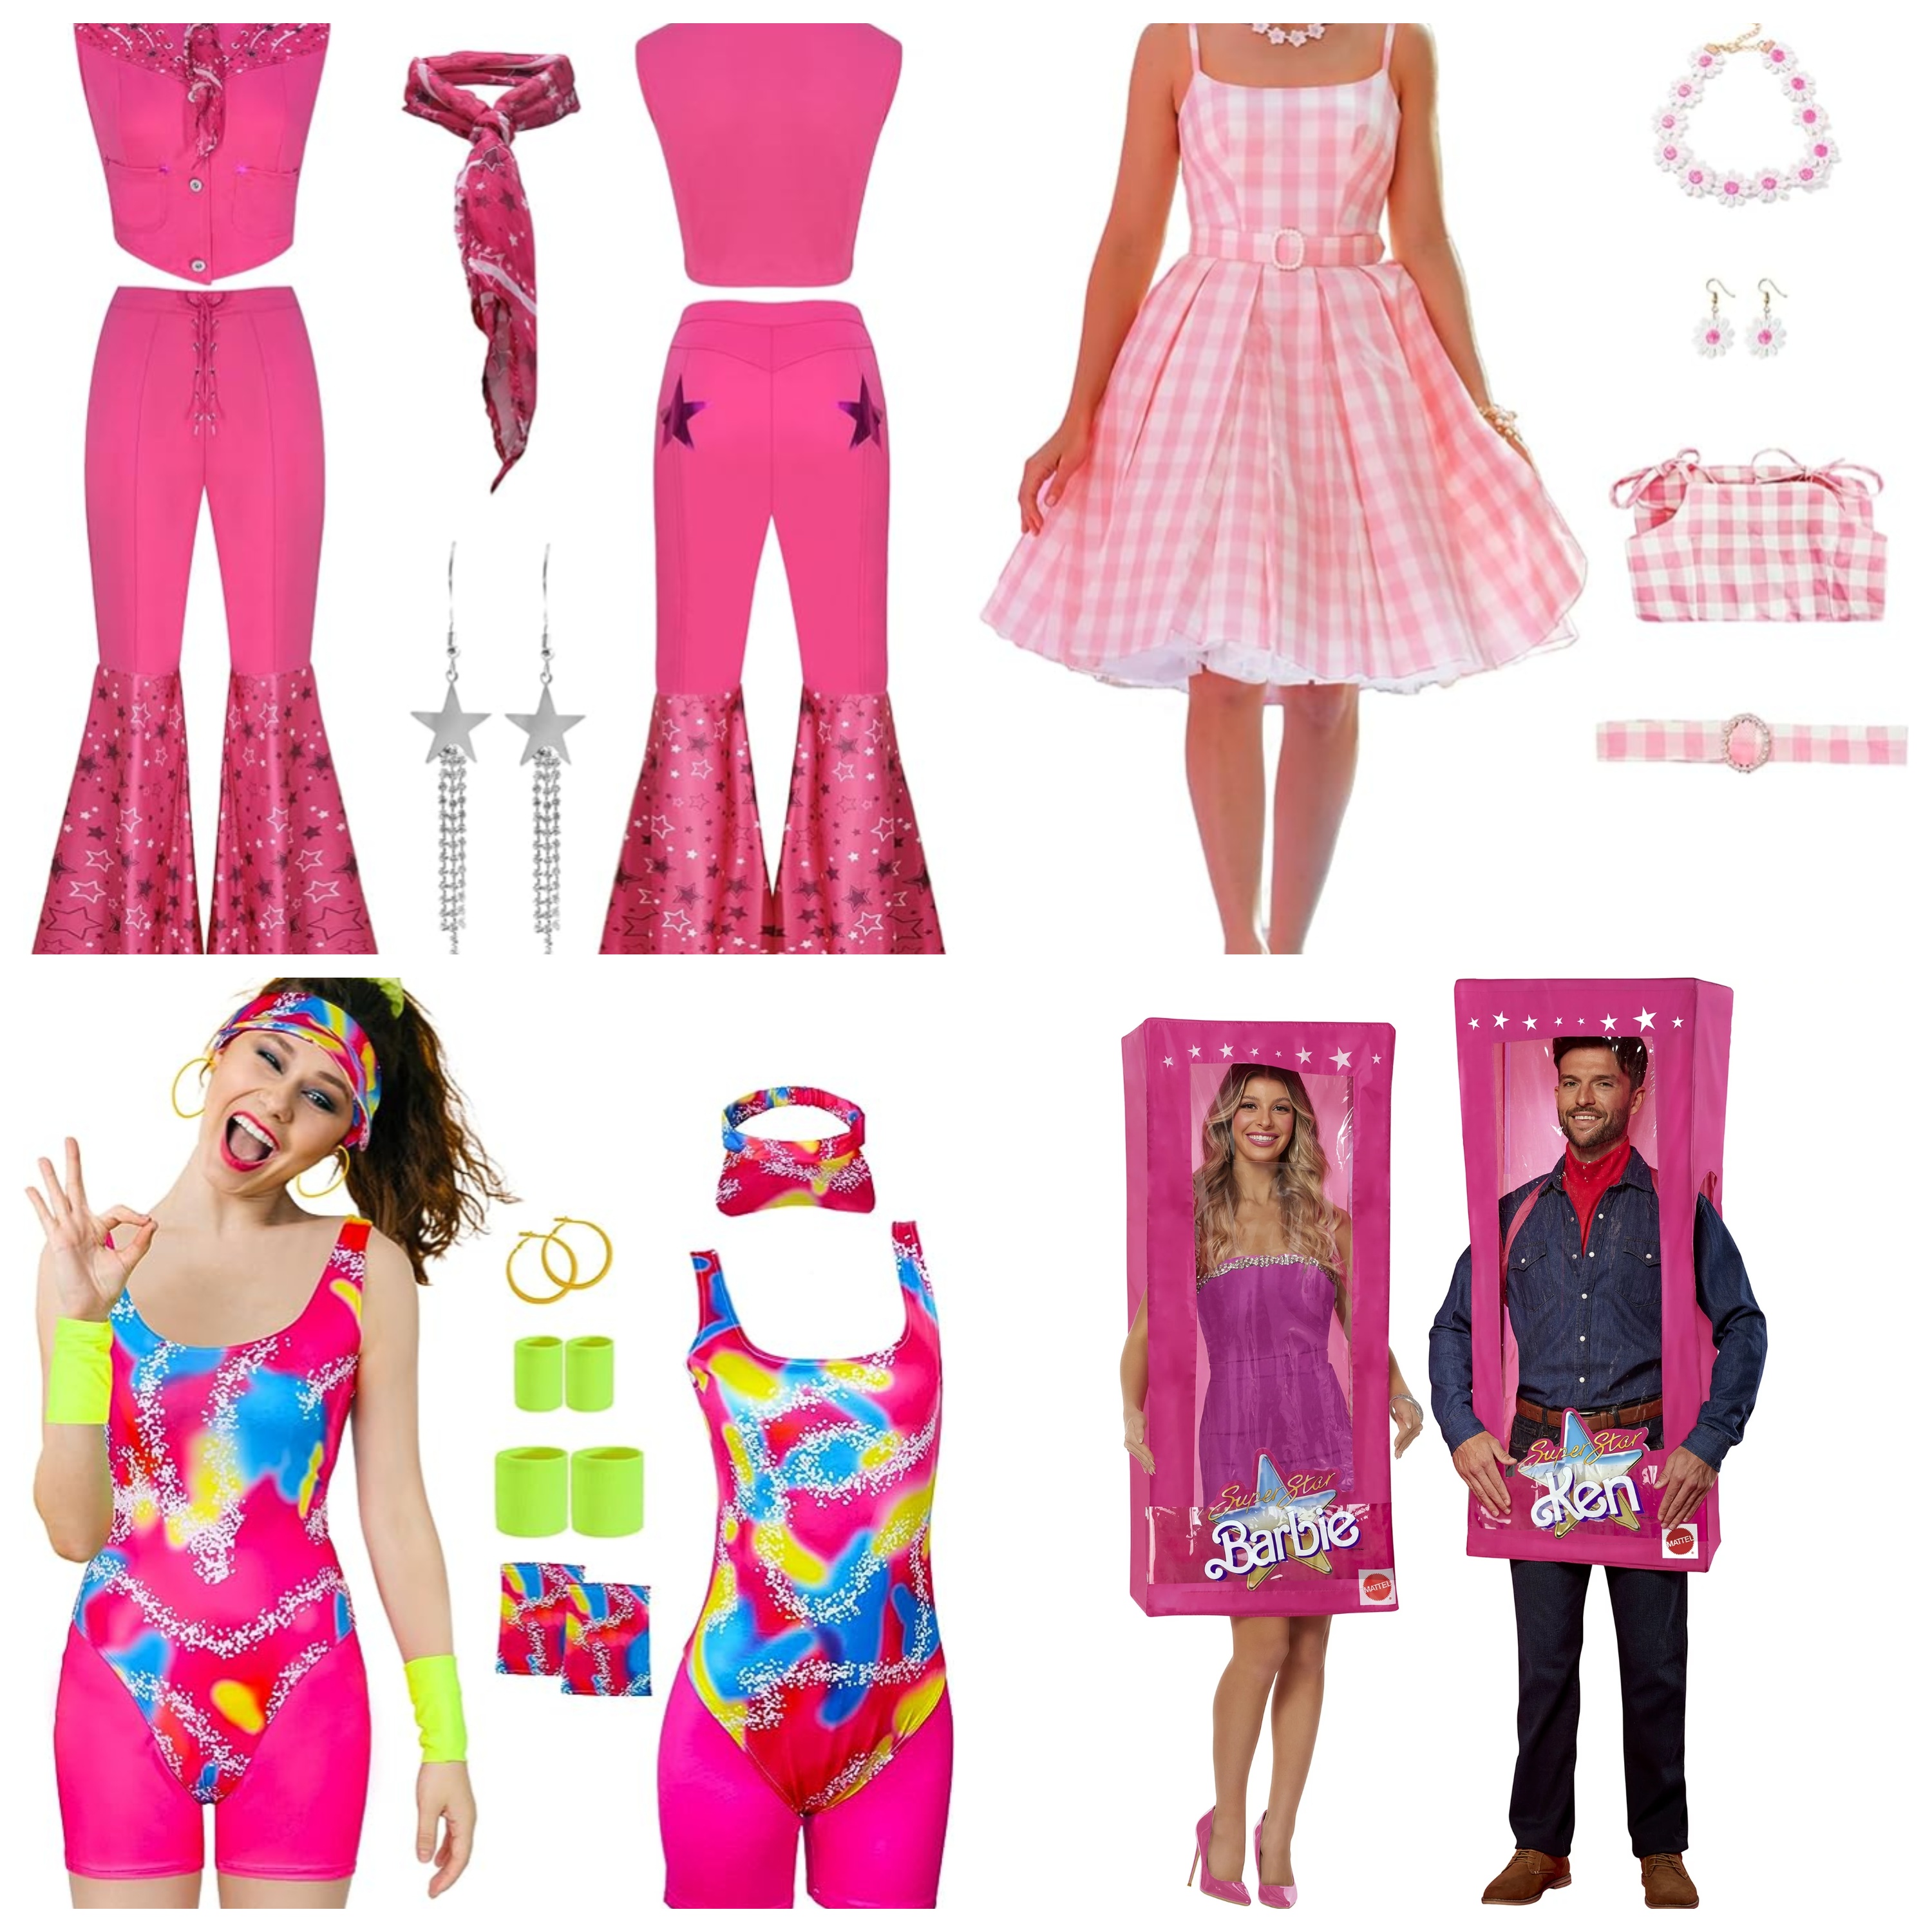 Get all dolled up with one of these Barbie-inspired Halloween